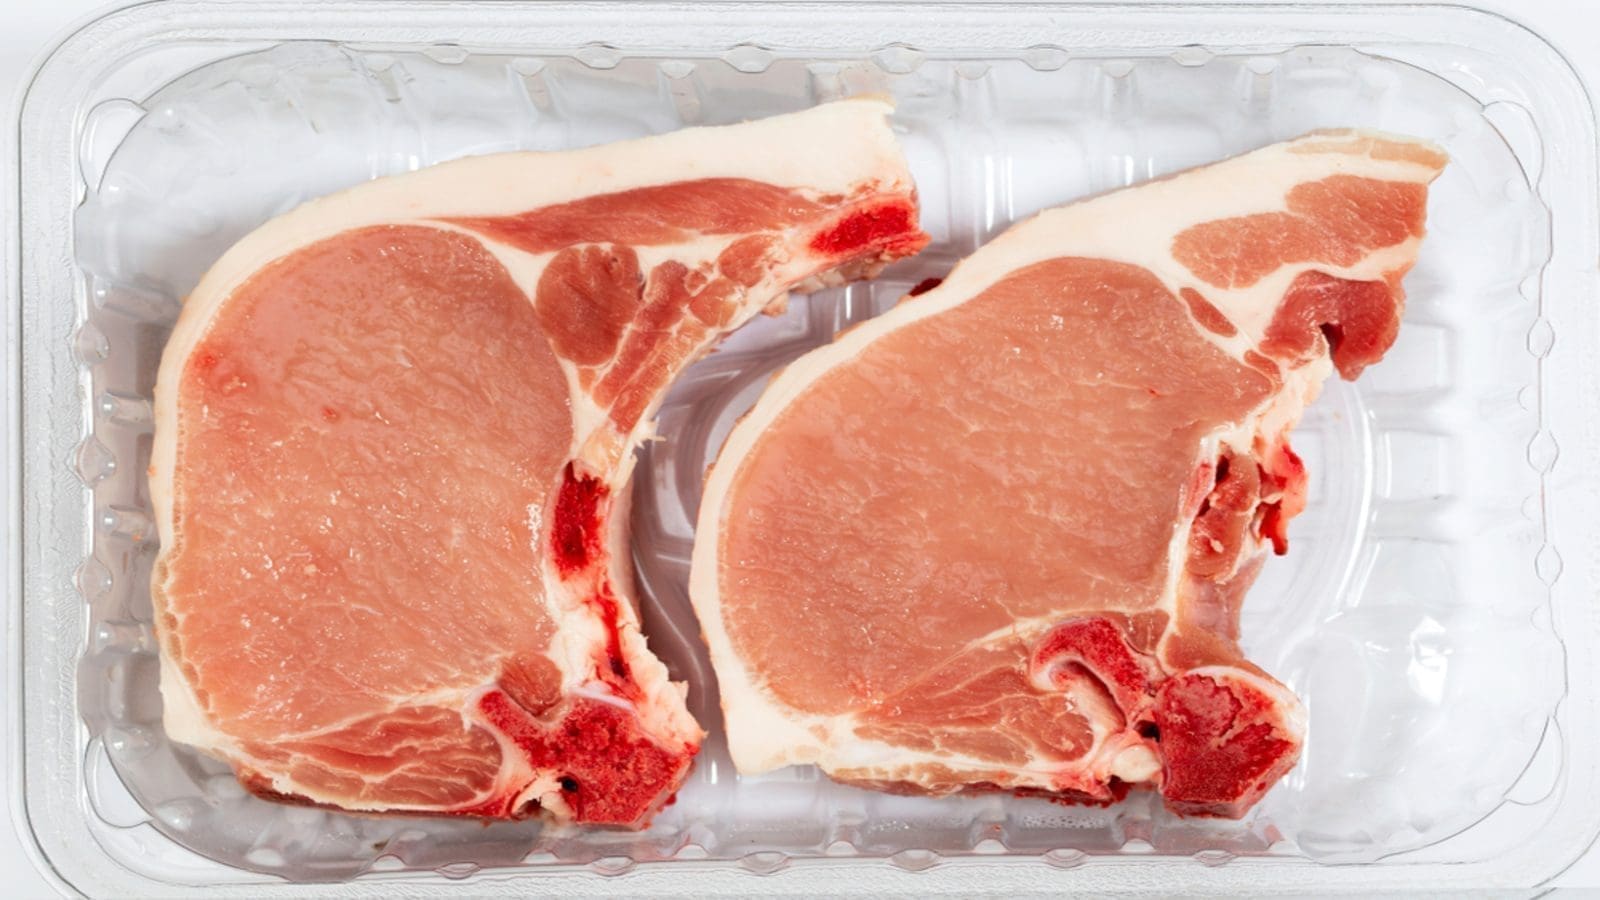 India greenlights US pork imports in exchange for greater access to US fresh produce market